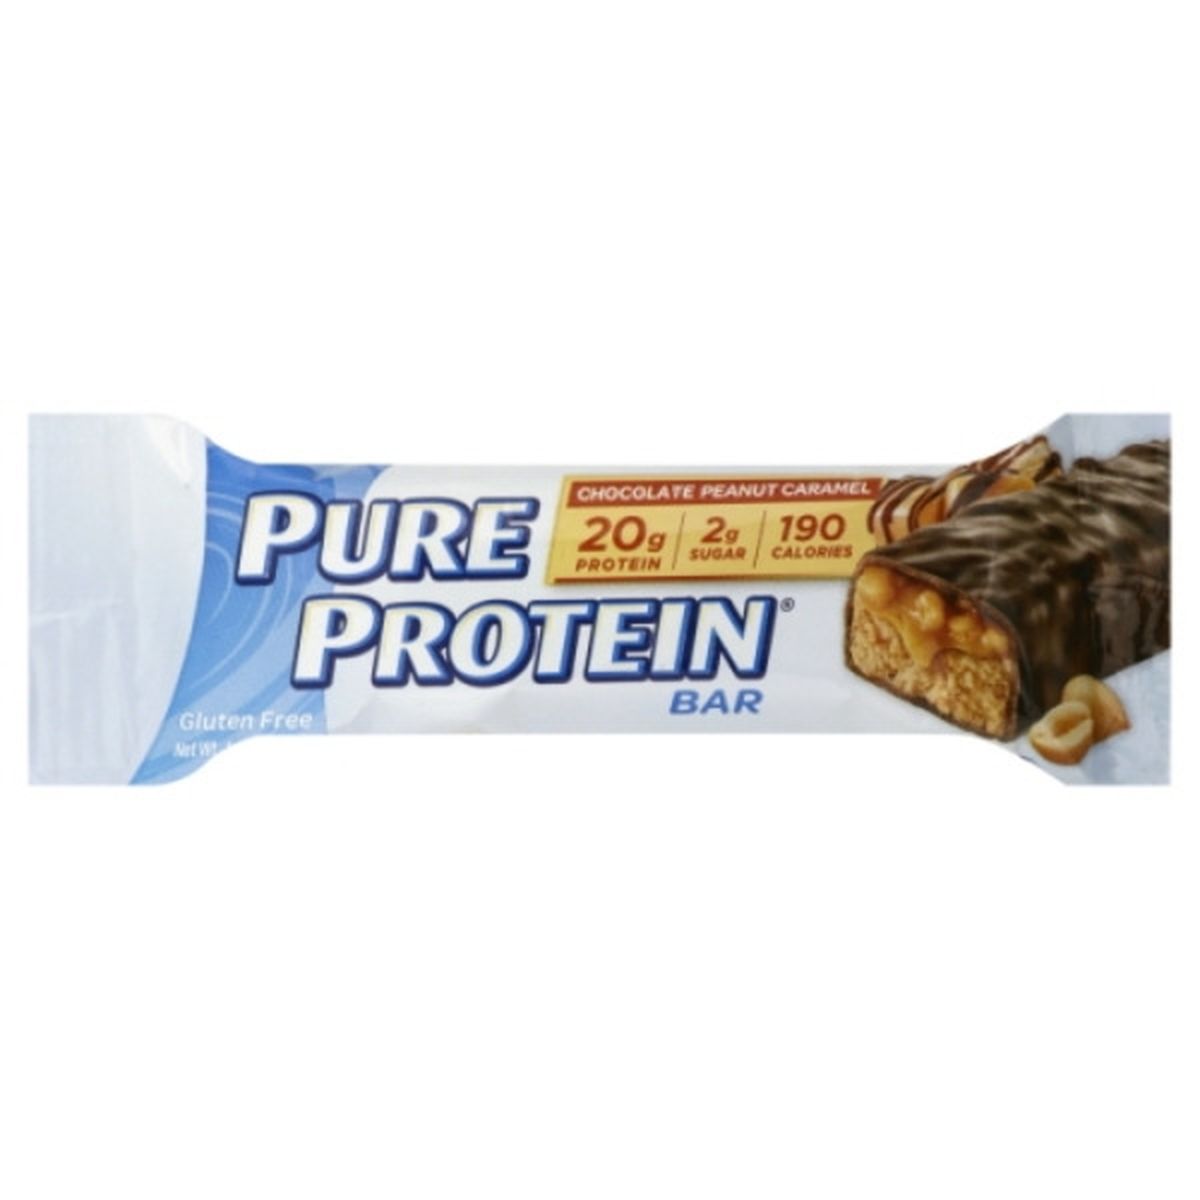 Calories in Pure Protein Protein Bar, Chocolate Peanut Caramel